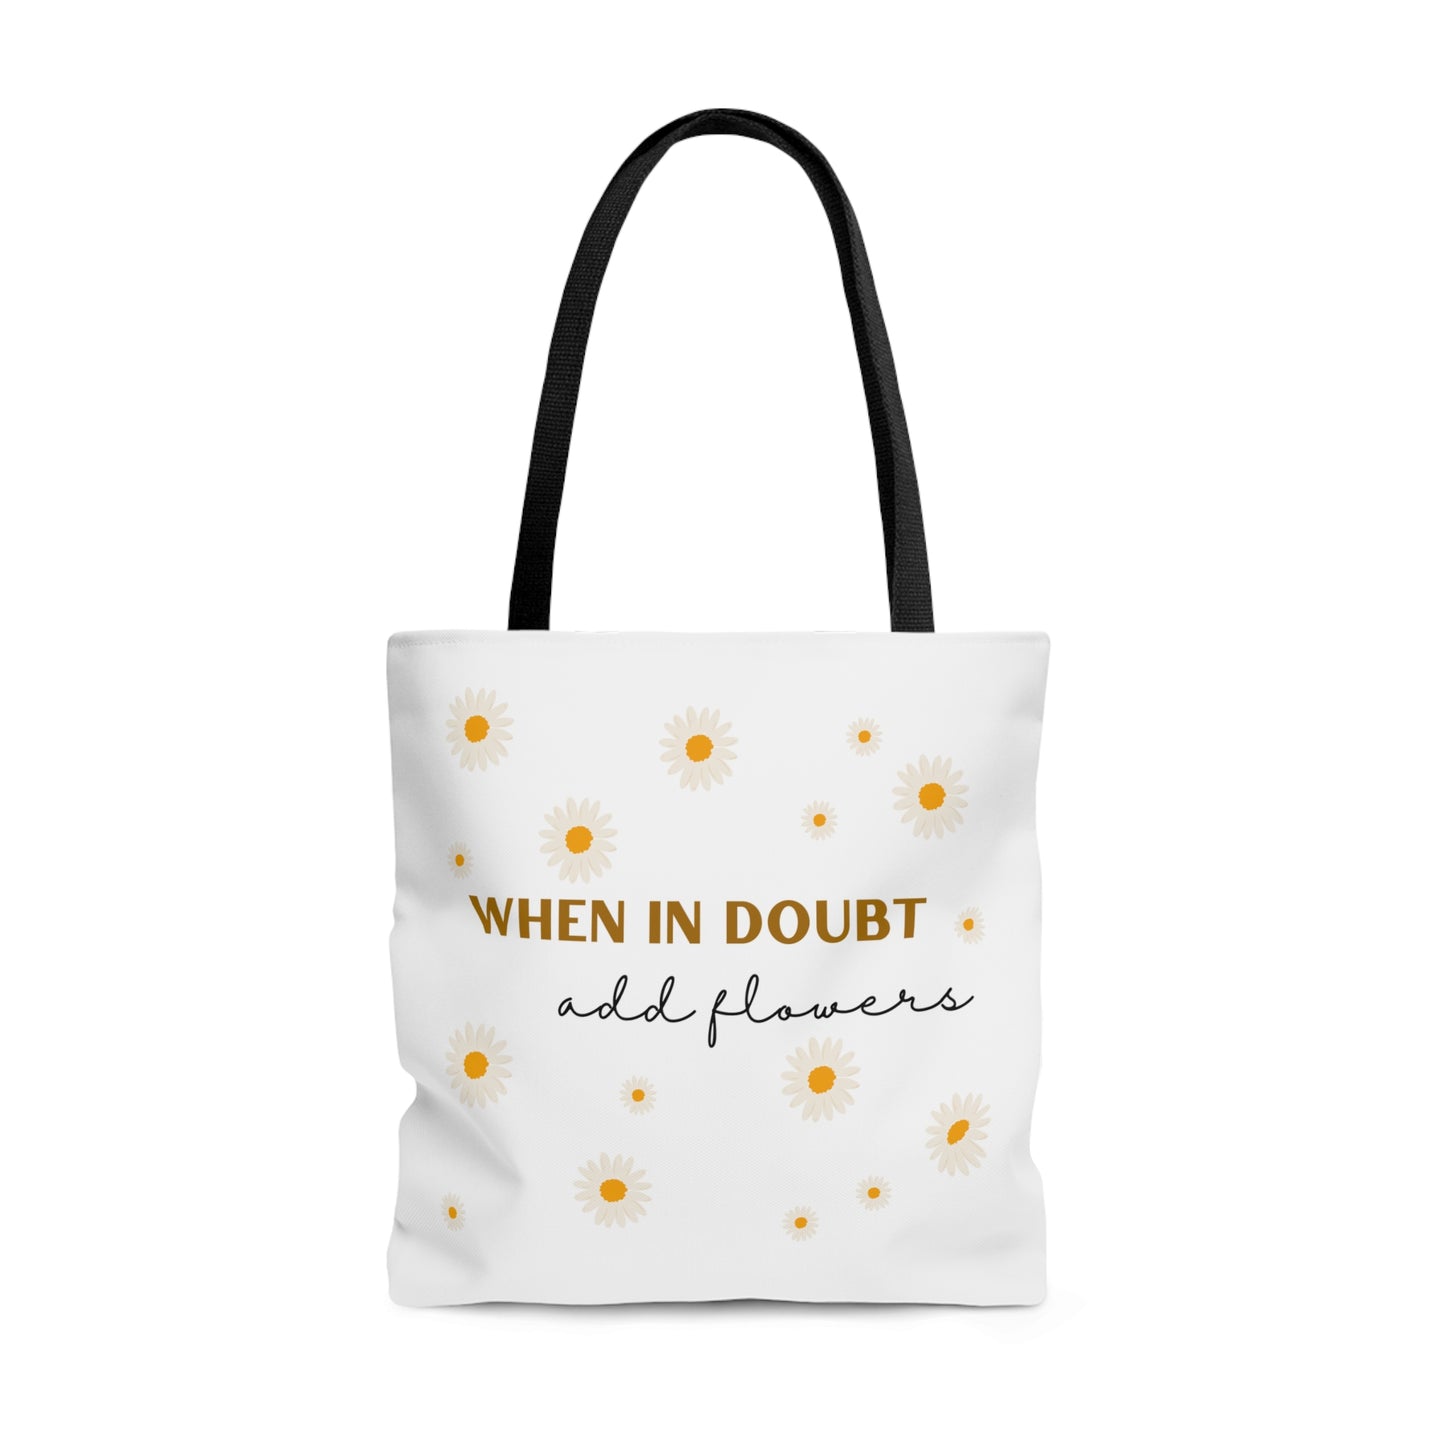 When In Doubt Add Flowers Tote Bag Fun for Plant and Gardening Lovers